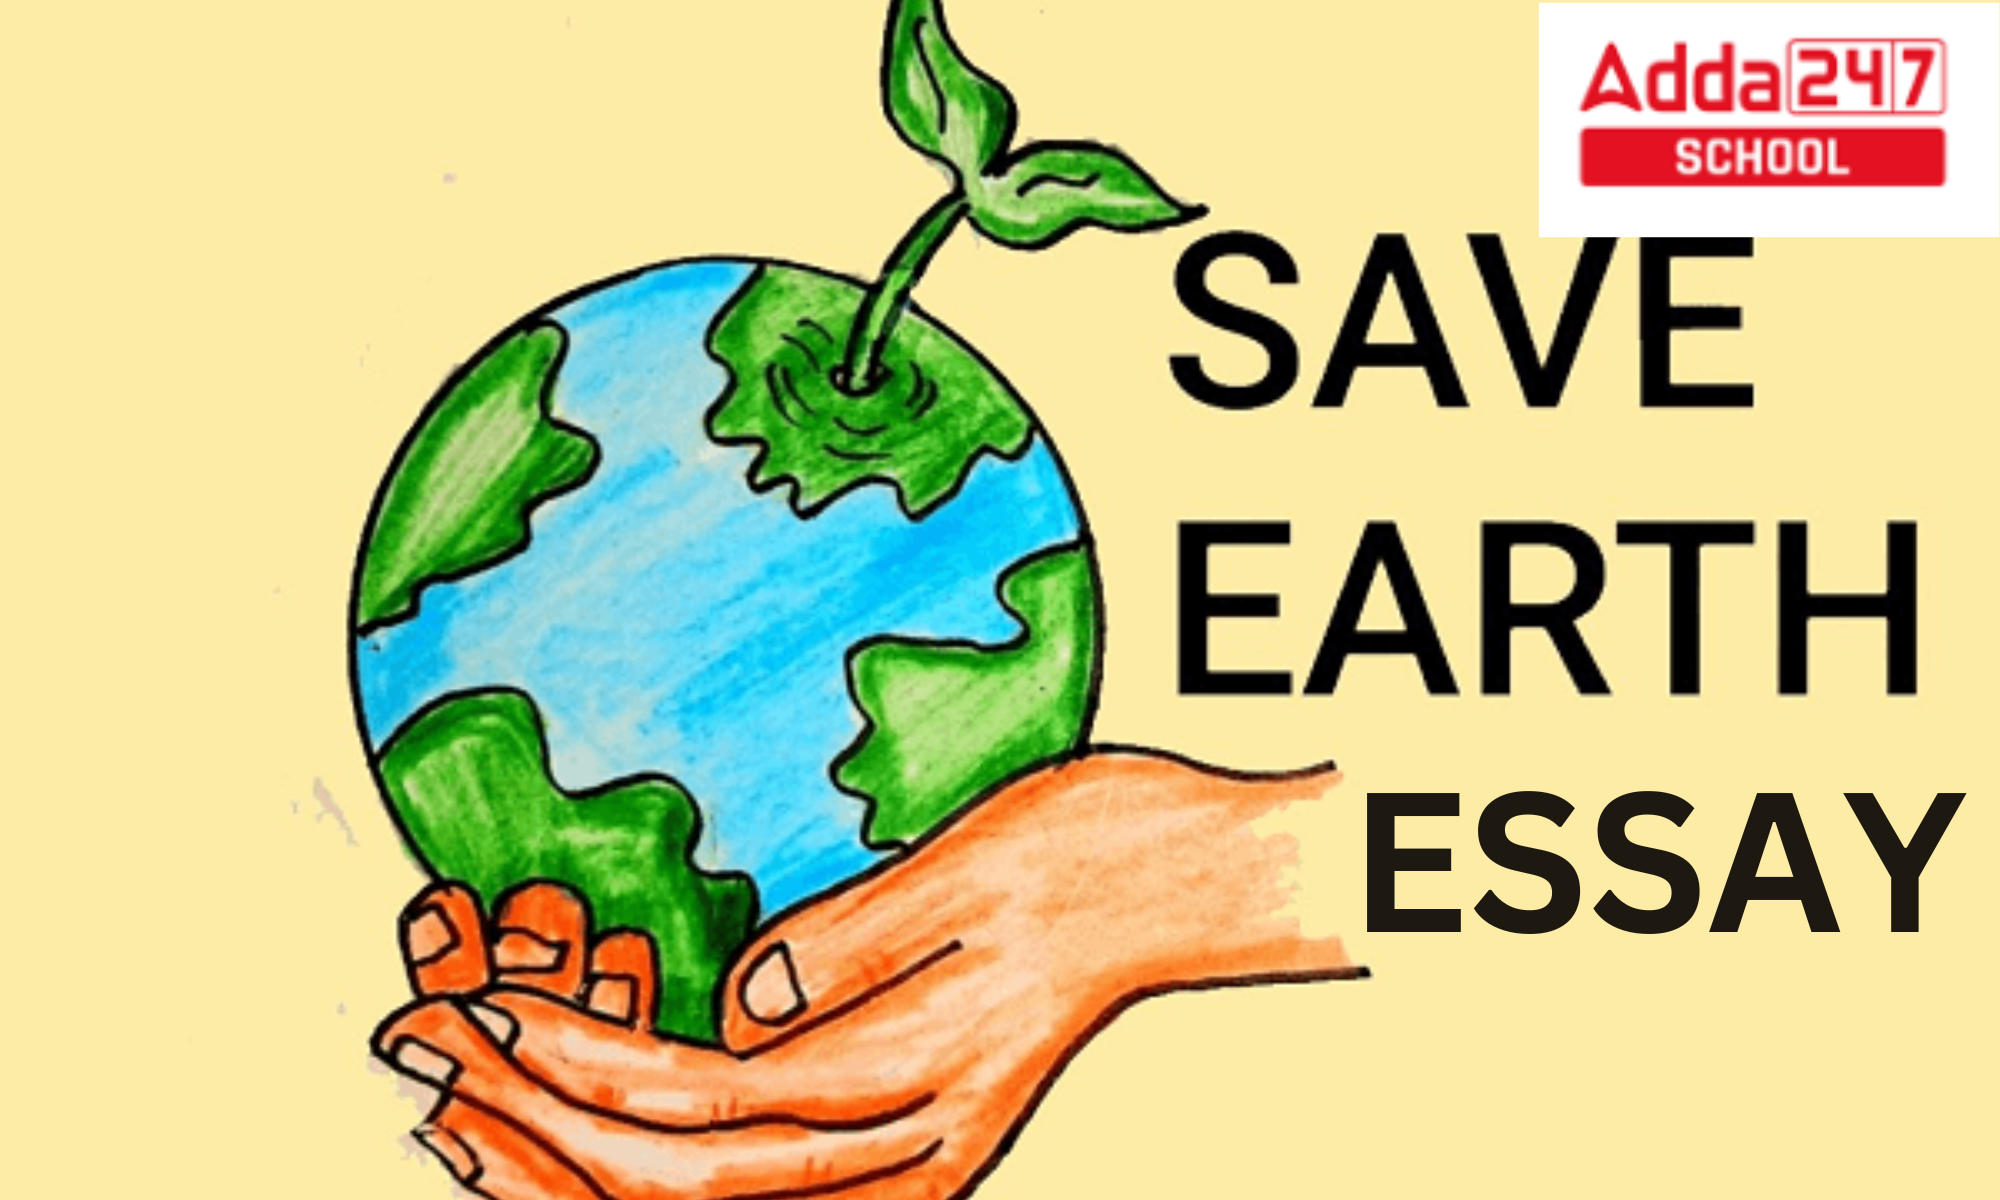 Save Earth Essay in 100-200 Words, Check Save Earth Poster